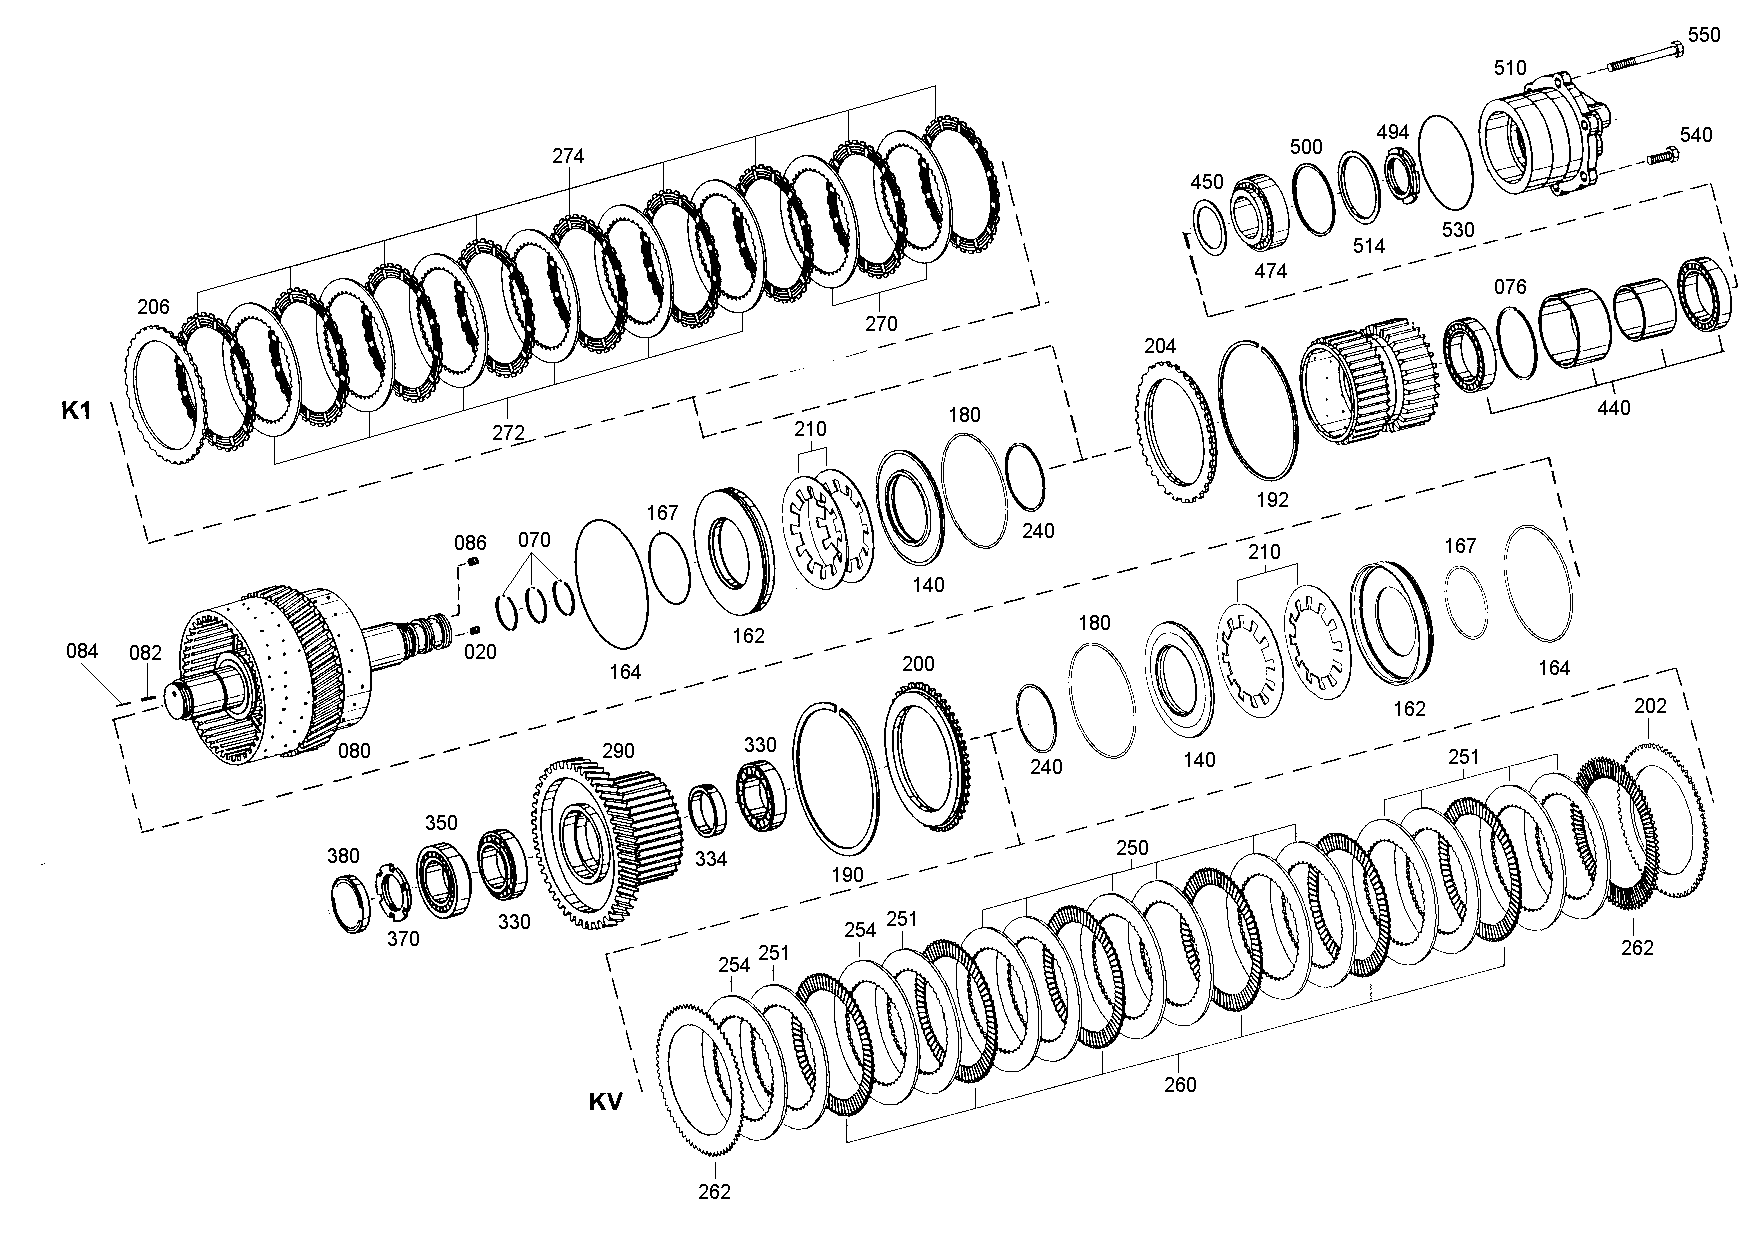 drawing for LIEBHERR GMBH 10028585 - CUP SPRING (figure 3)